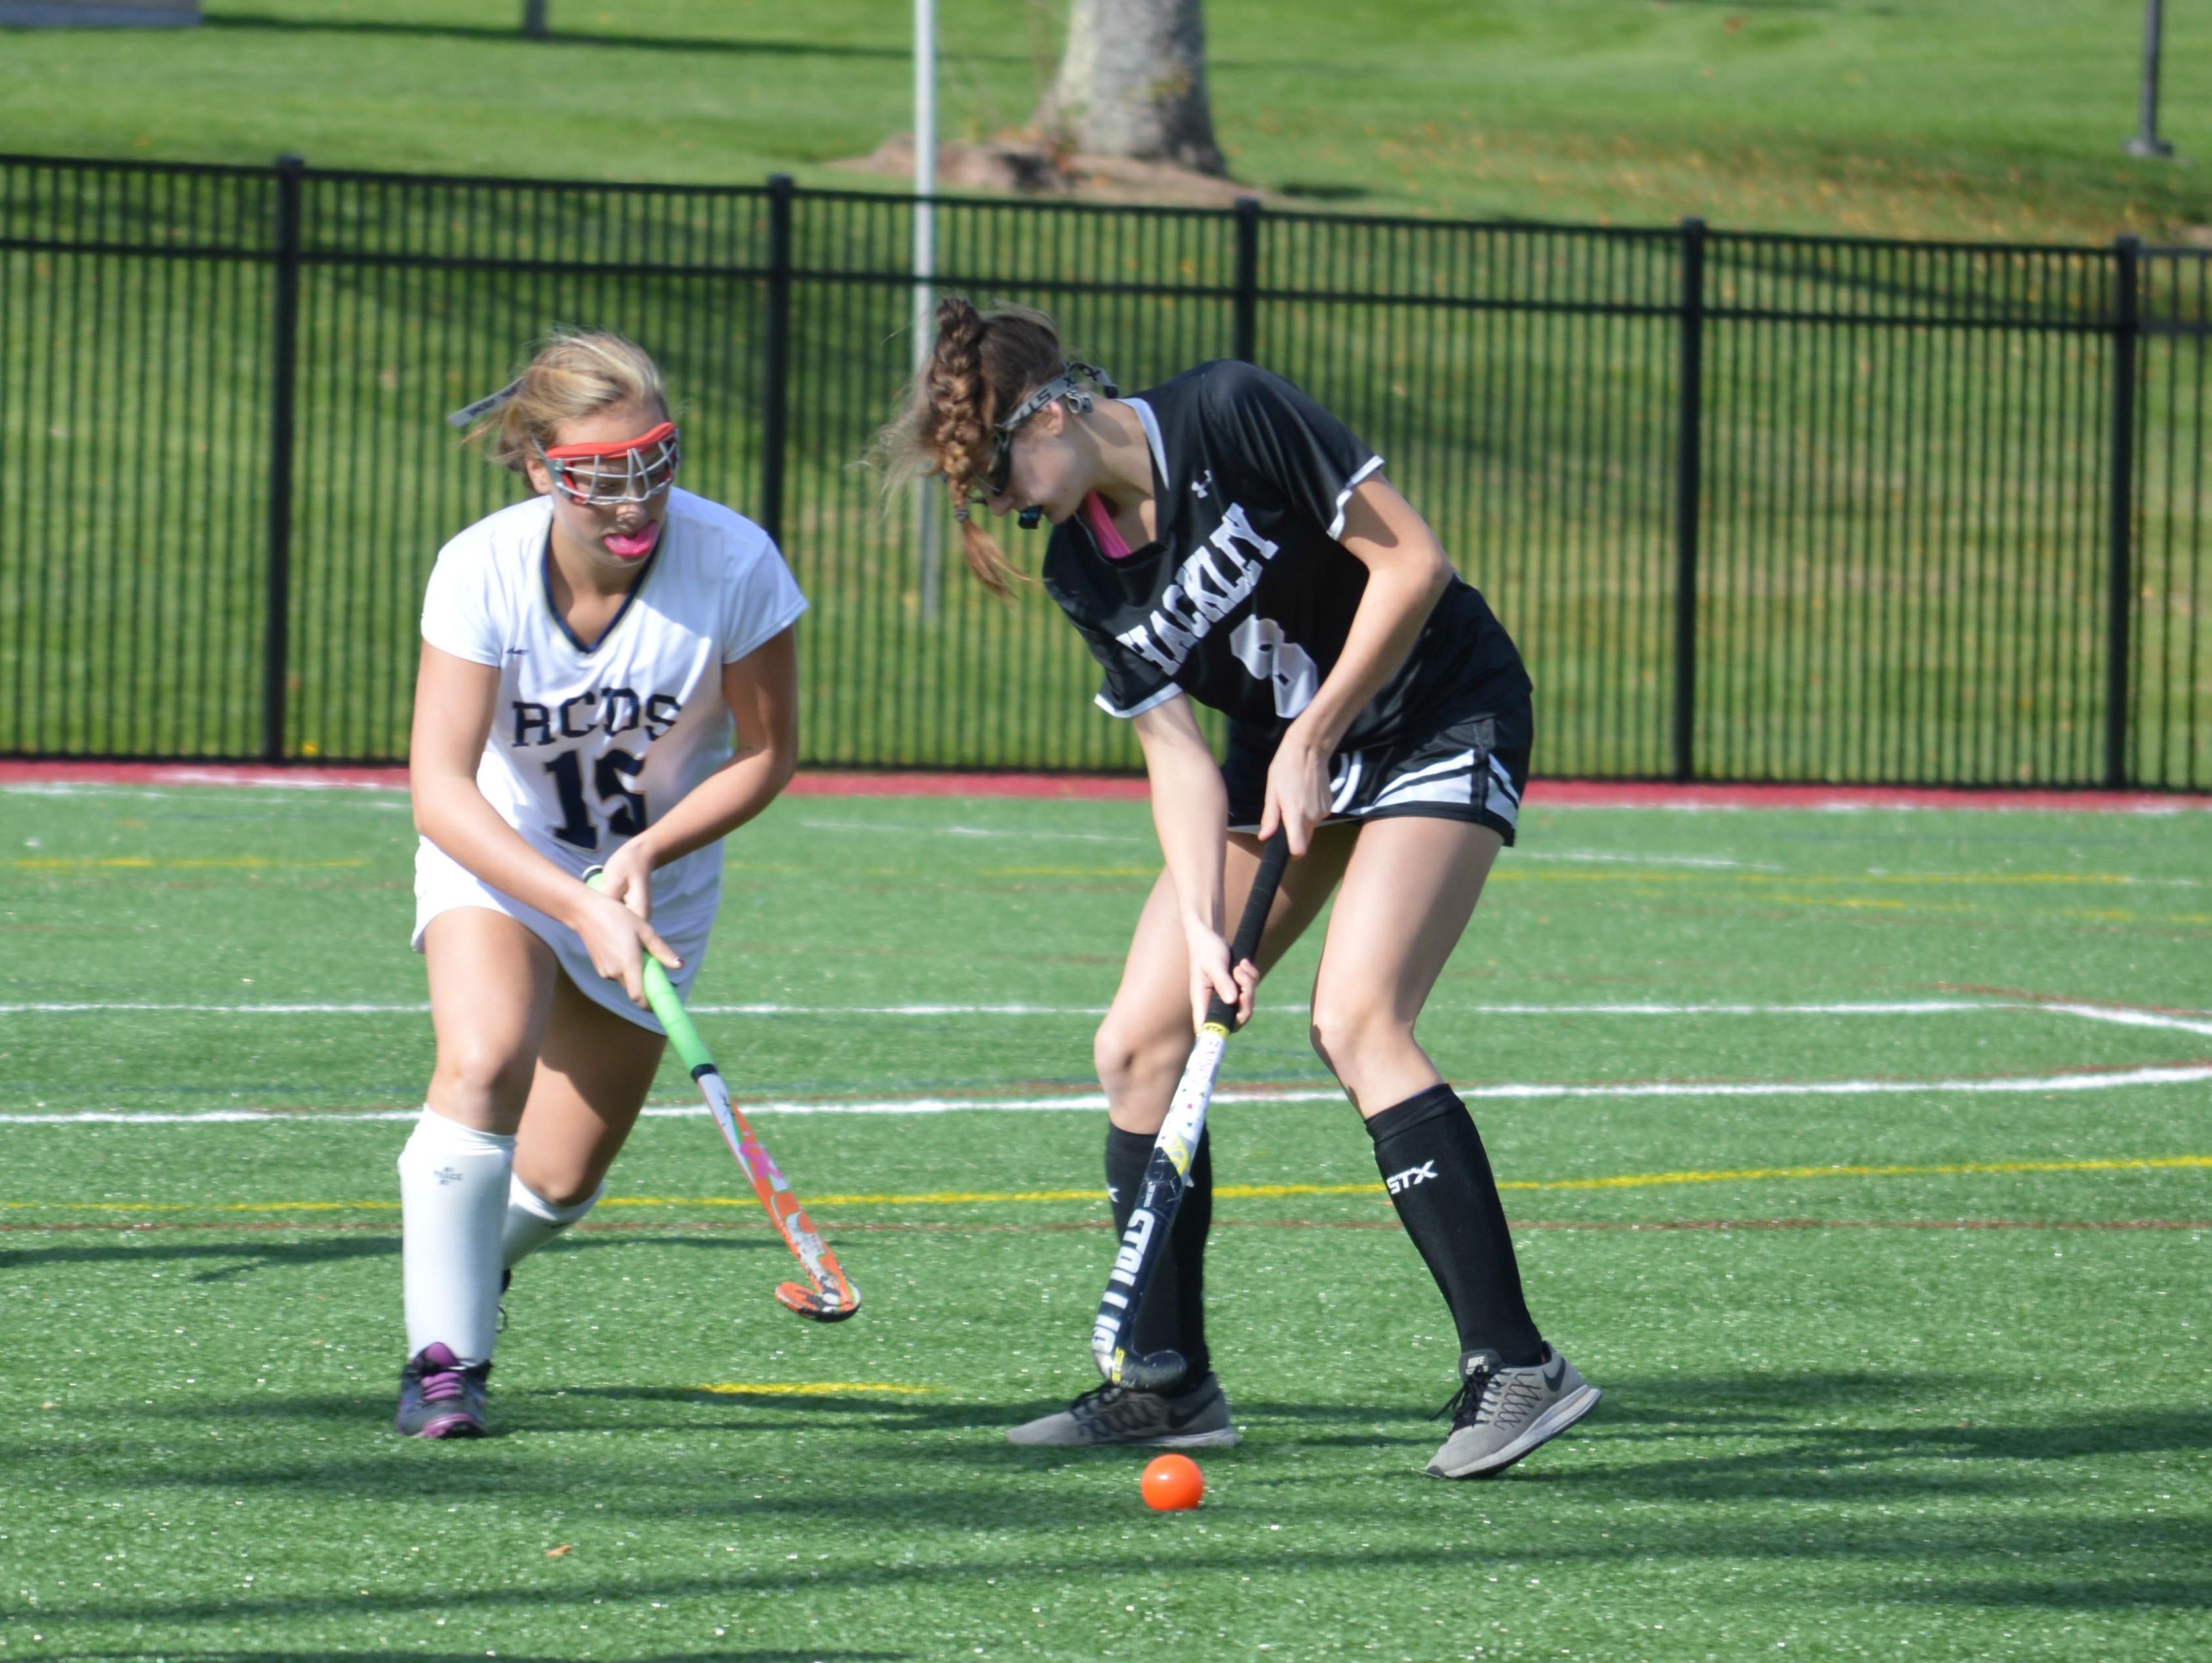 Hackley School's Karina Bridger defends against Rye Country Day's Katherine Holtby during the 2016 NYSAIS field hockey final at Manhattanville College on Nov. 6, 2016.